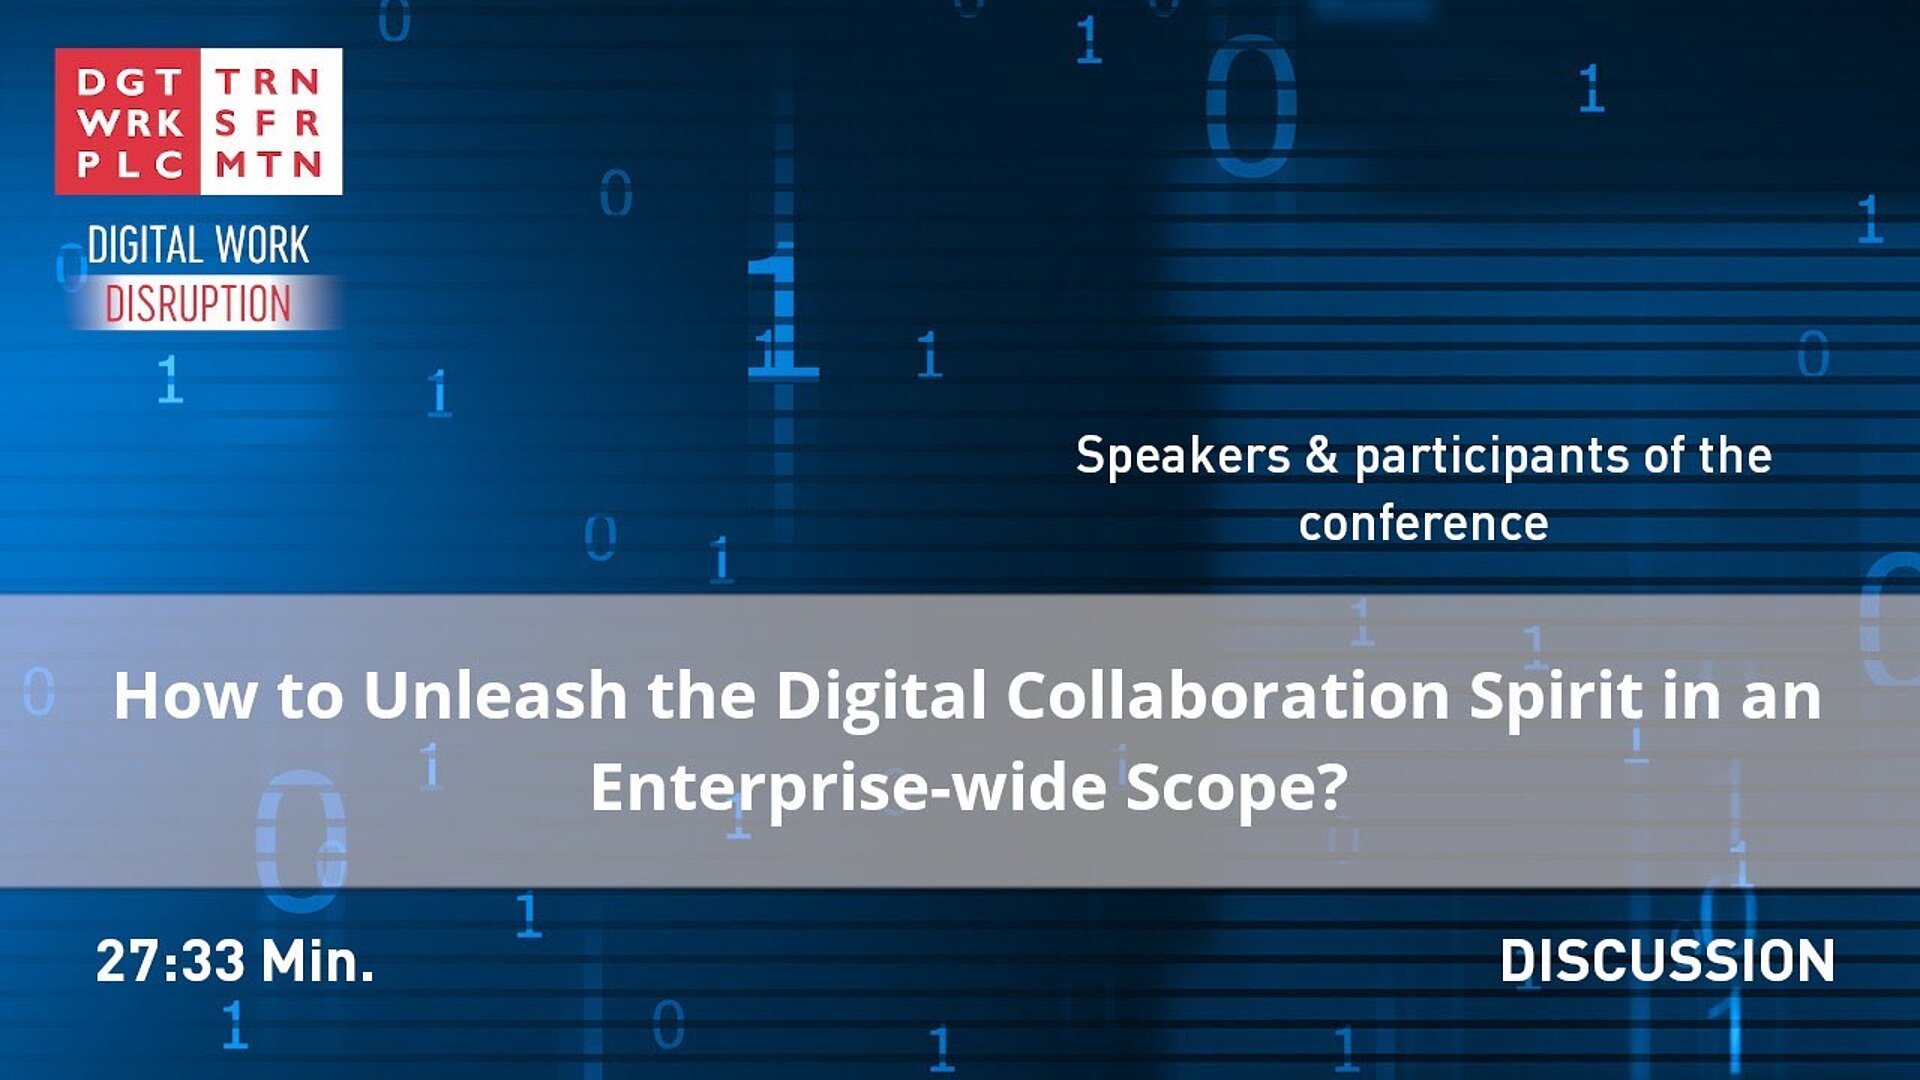 How to Unleash the Digital Collaboration Spirit in an Enterprise-wide Scope?